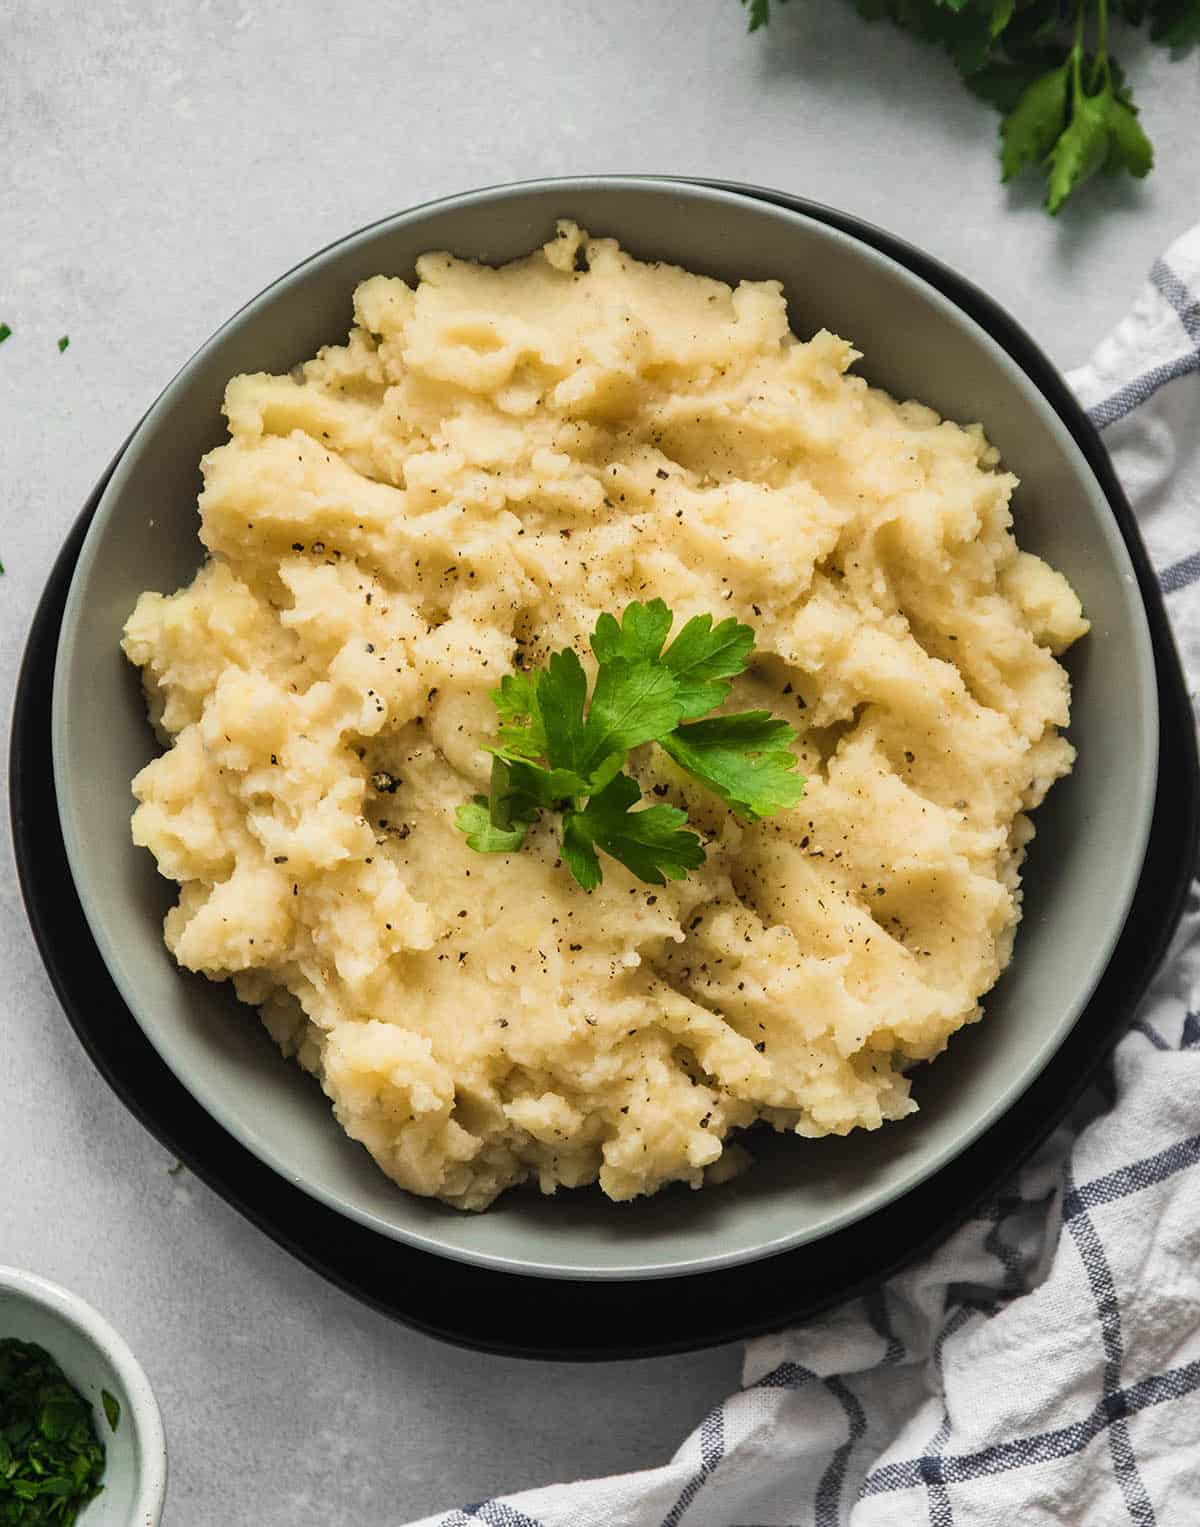 Cauliflower mashed potatoes topped with parsley.